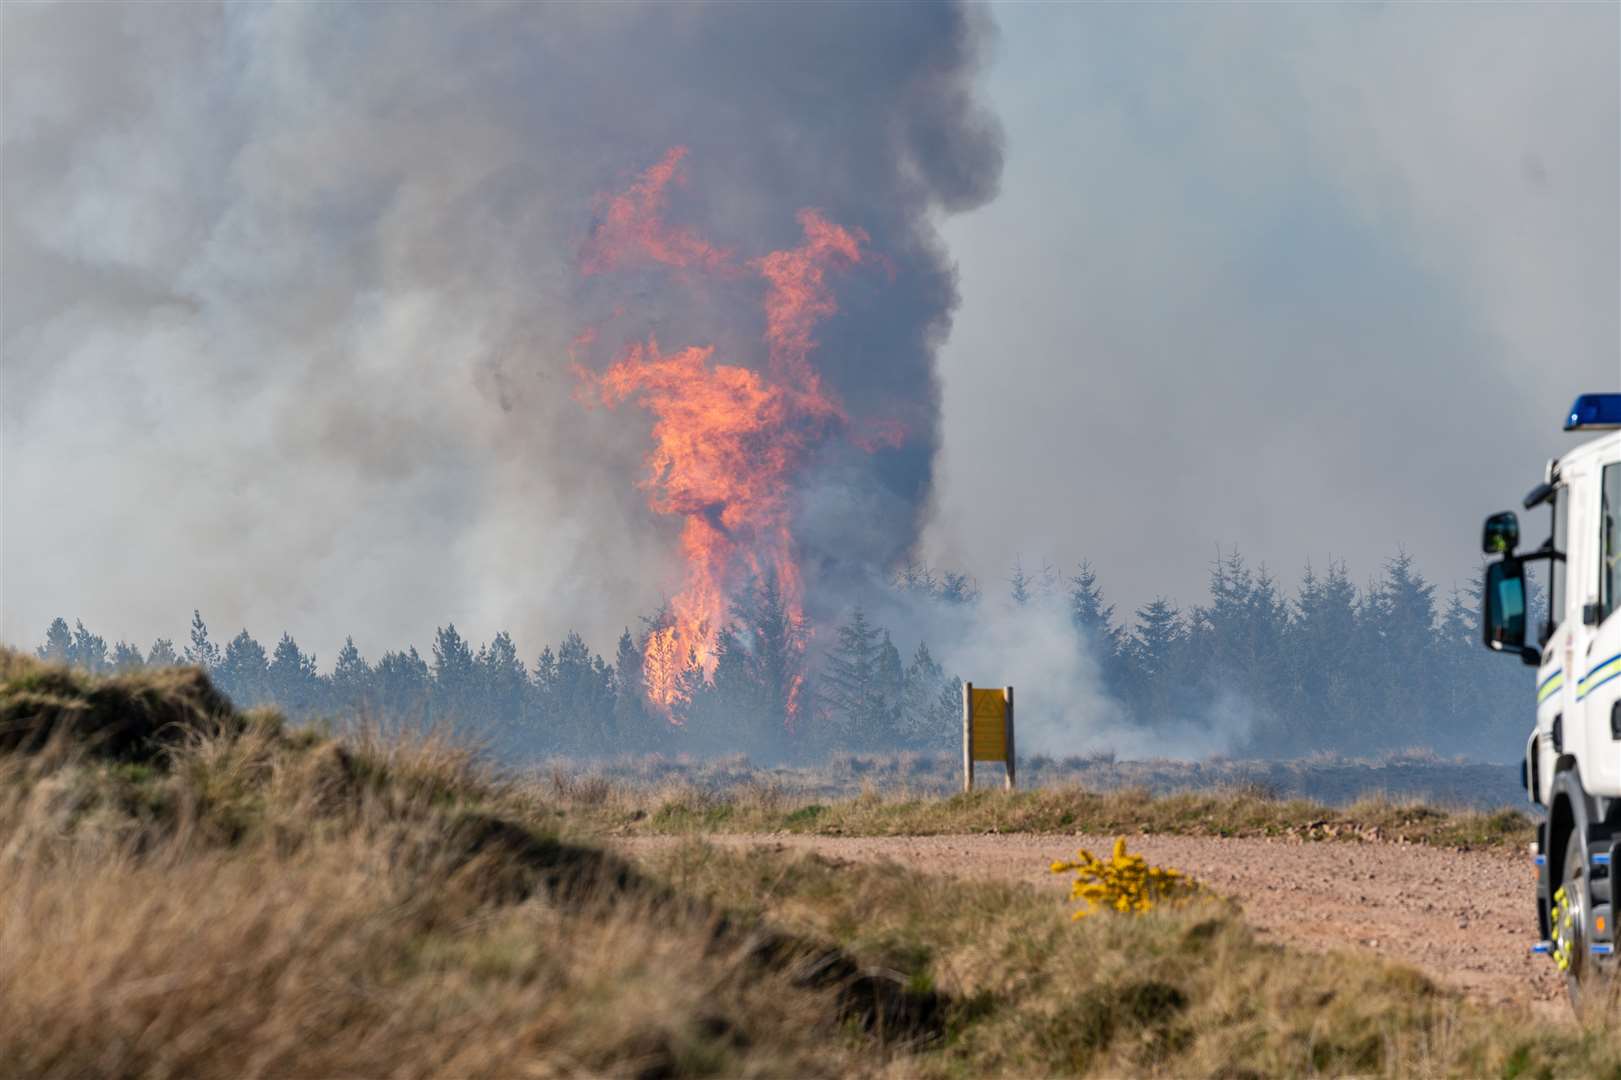 The wildfire entered forest areas near Dunphail. Picture by Brian Smith.